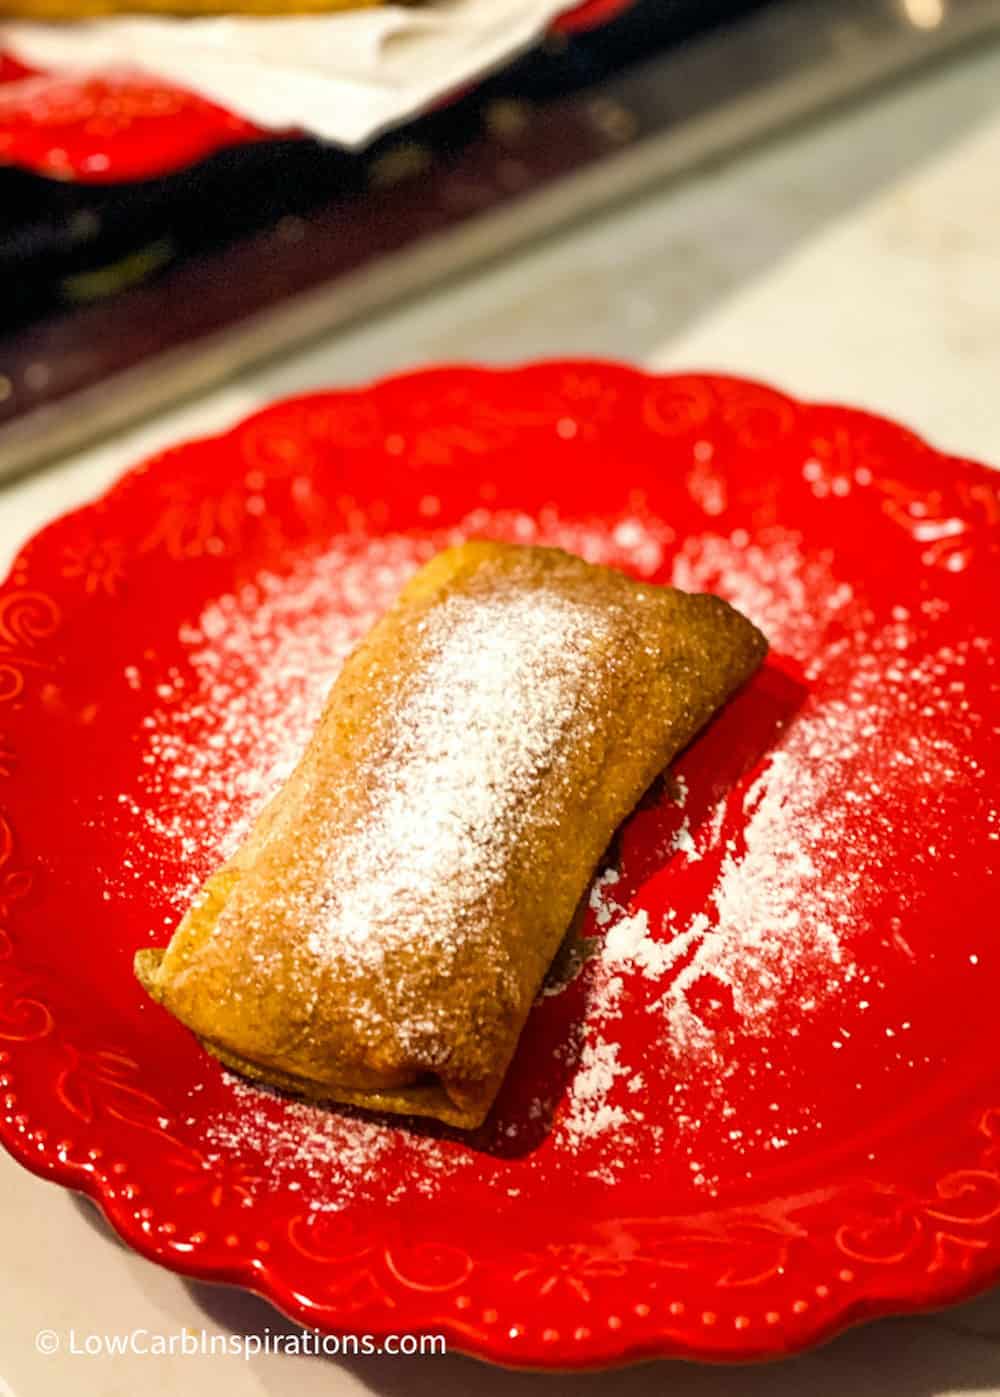 Pastry dessert dusted with sugar on a red plate